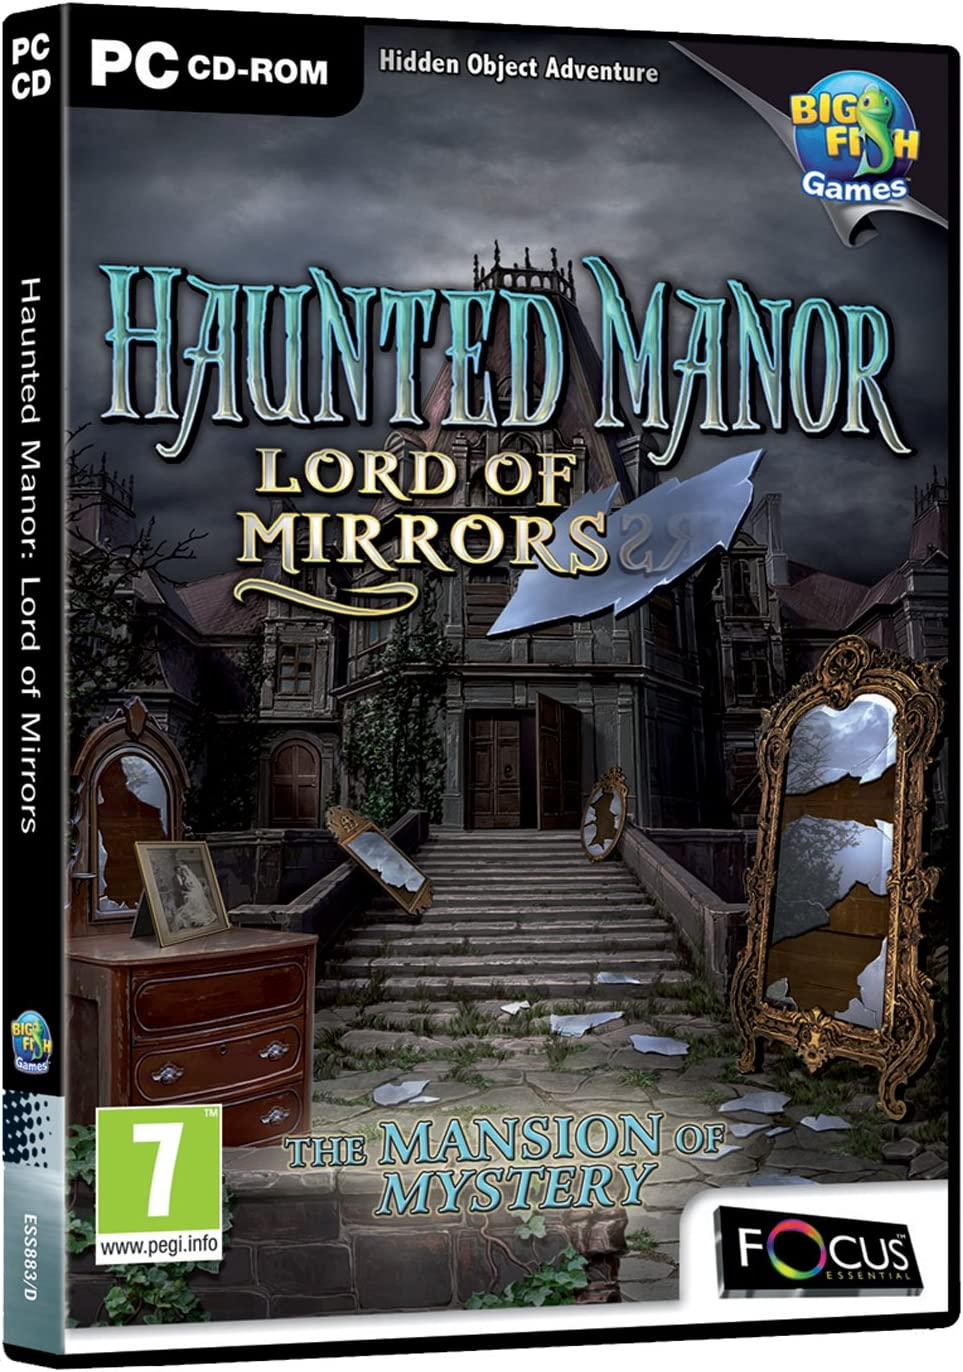 Haunted Manor: Lord of Mirrors (PC CD)